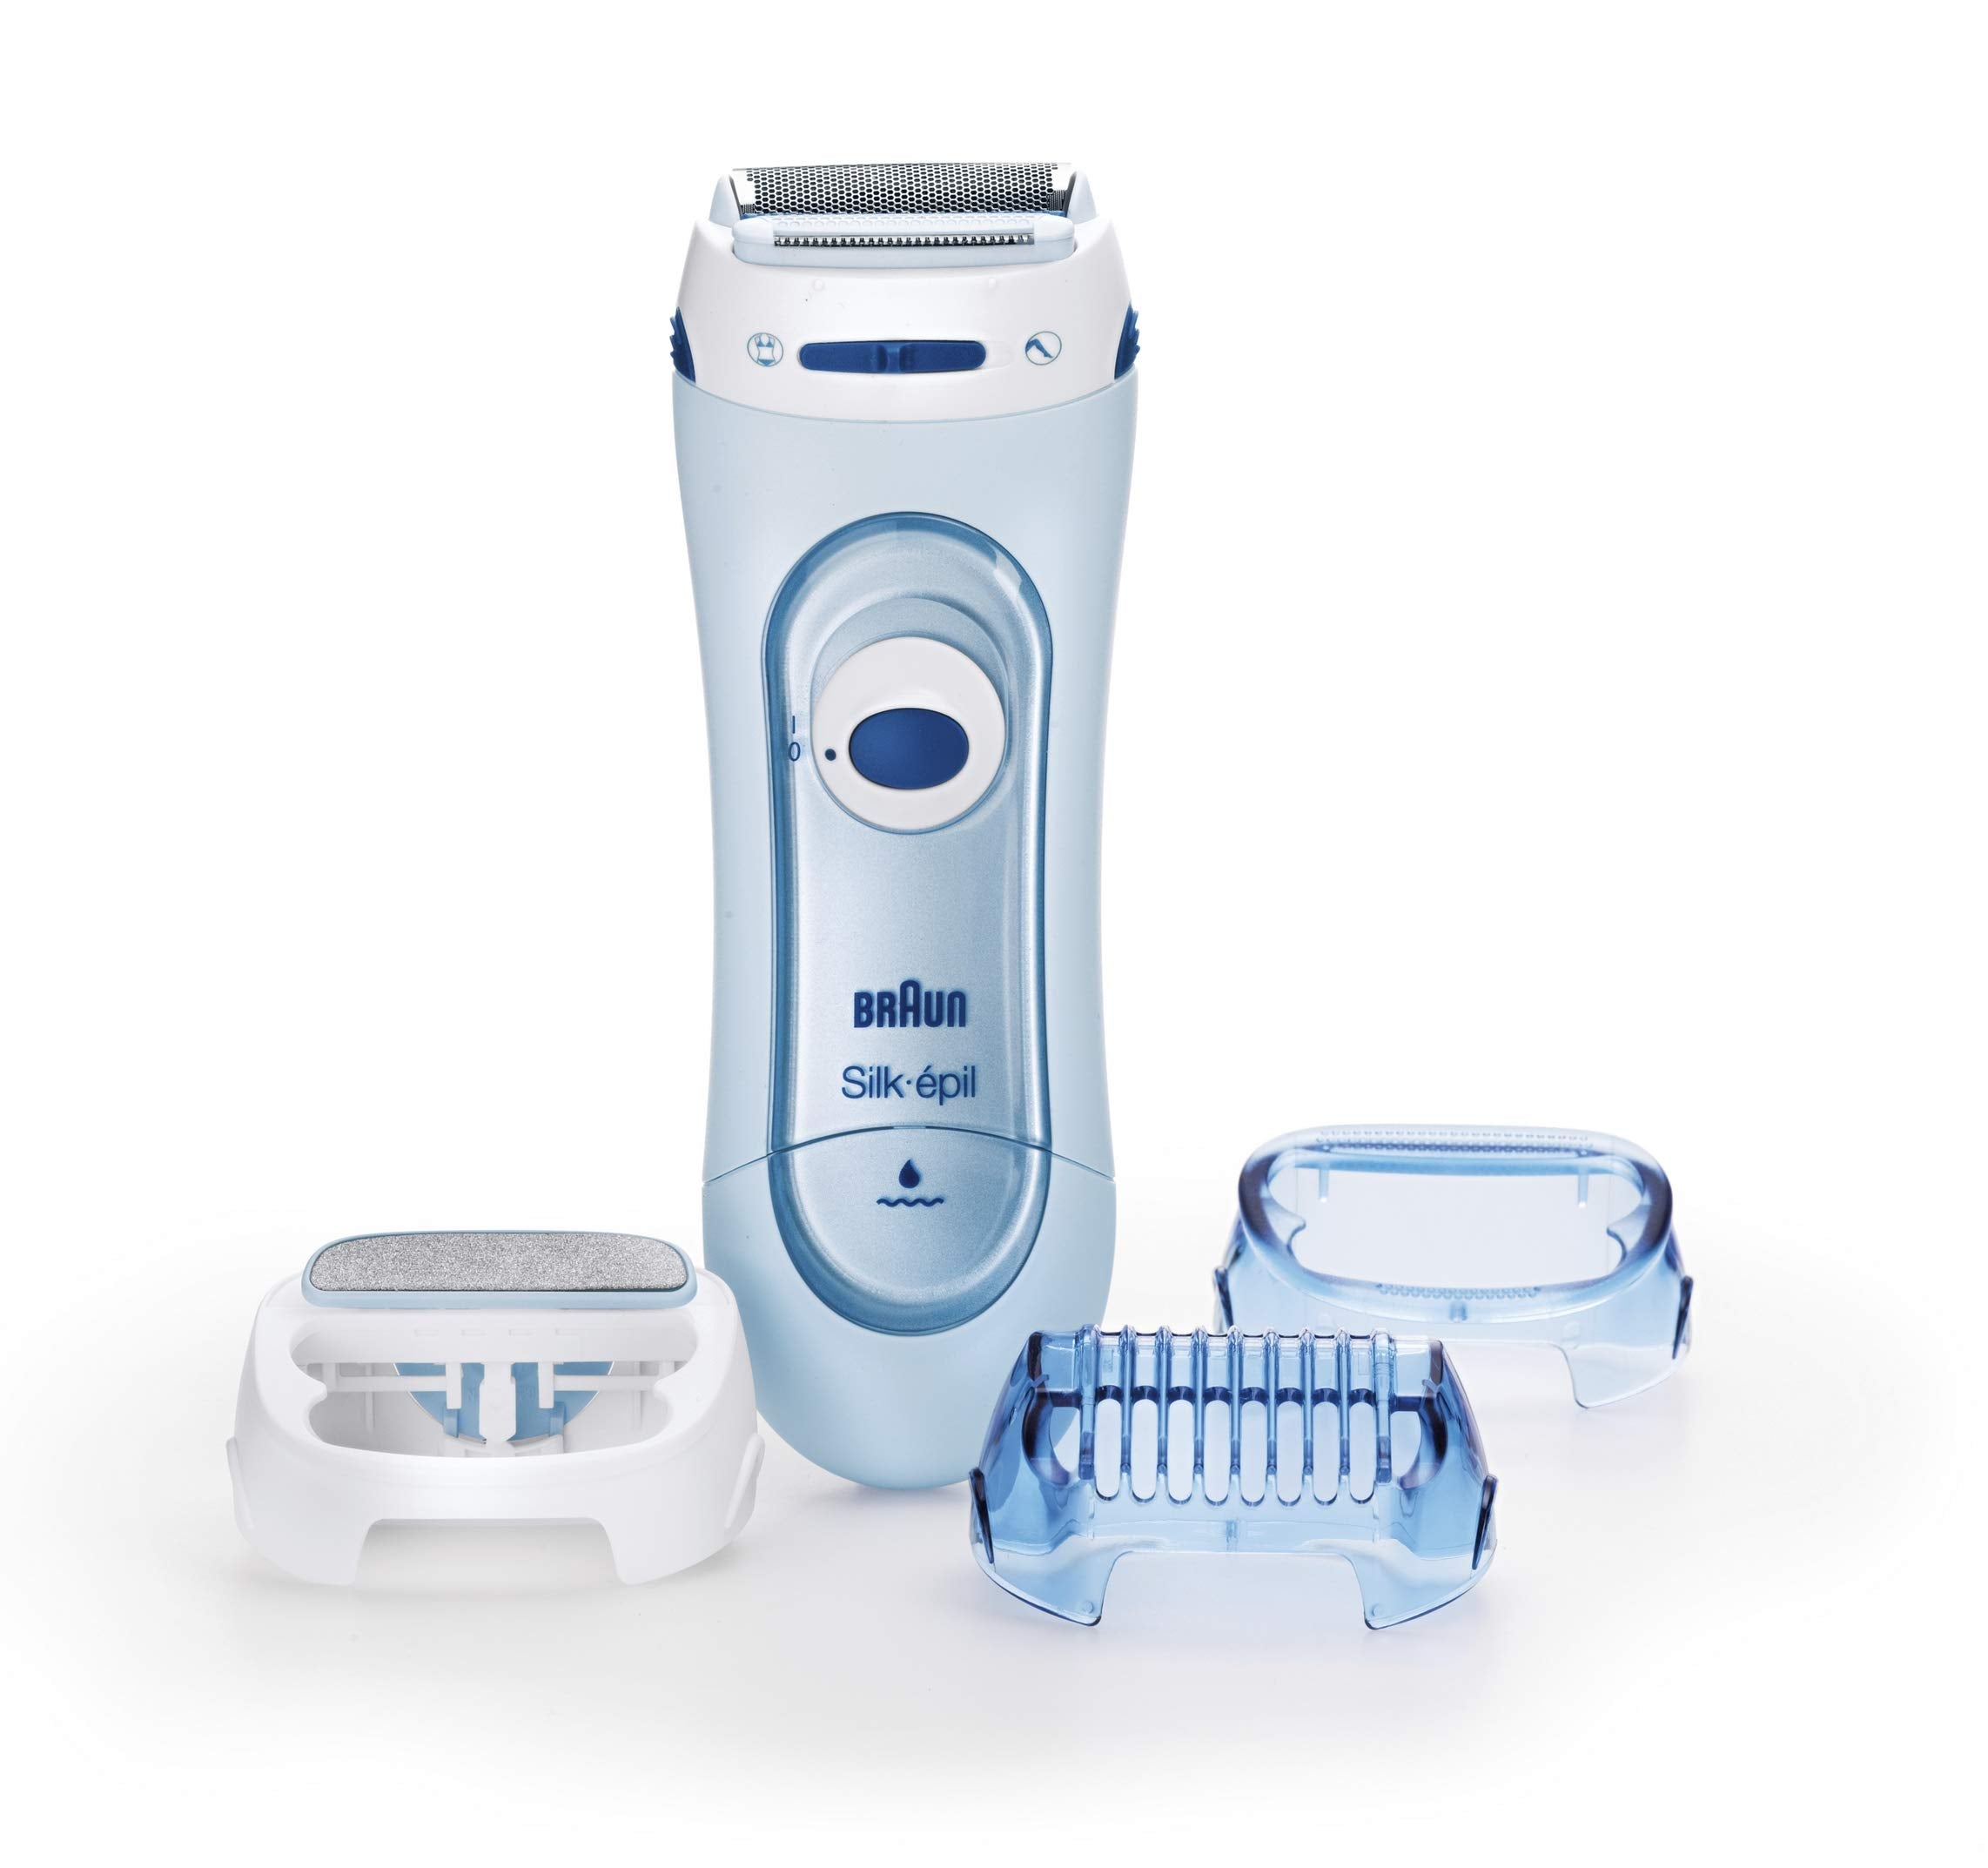 Braun Silk-epil Lady Shaver 5-160 Blue, 3-in-1 Wet & Dry Electric Shaver